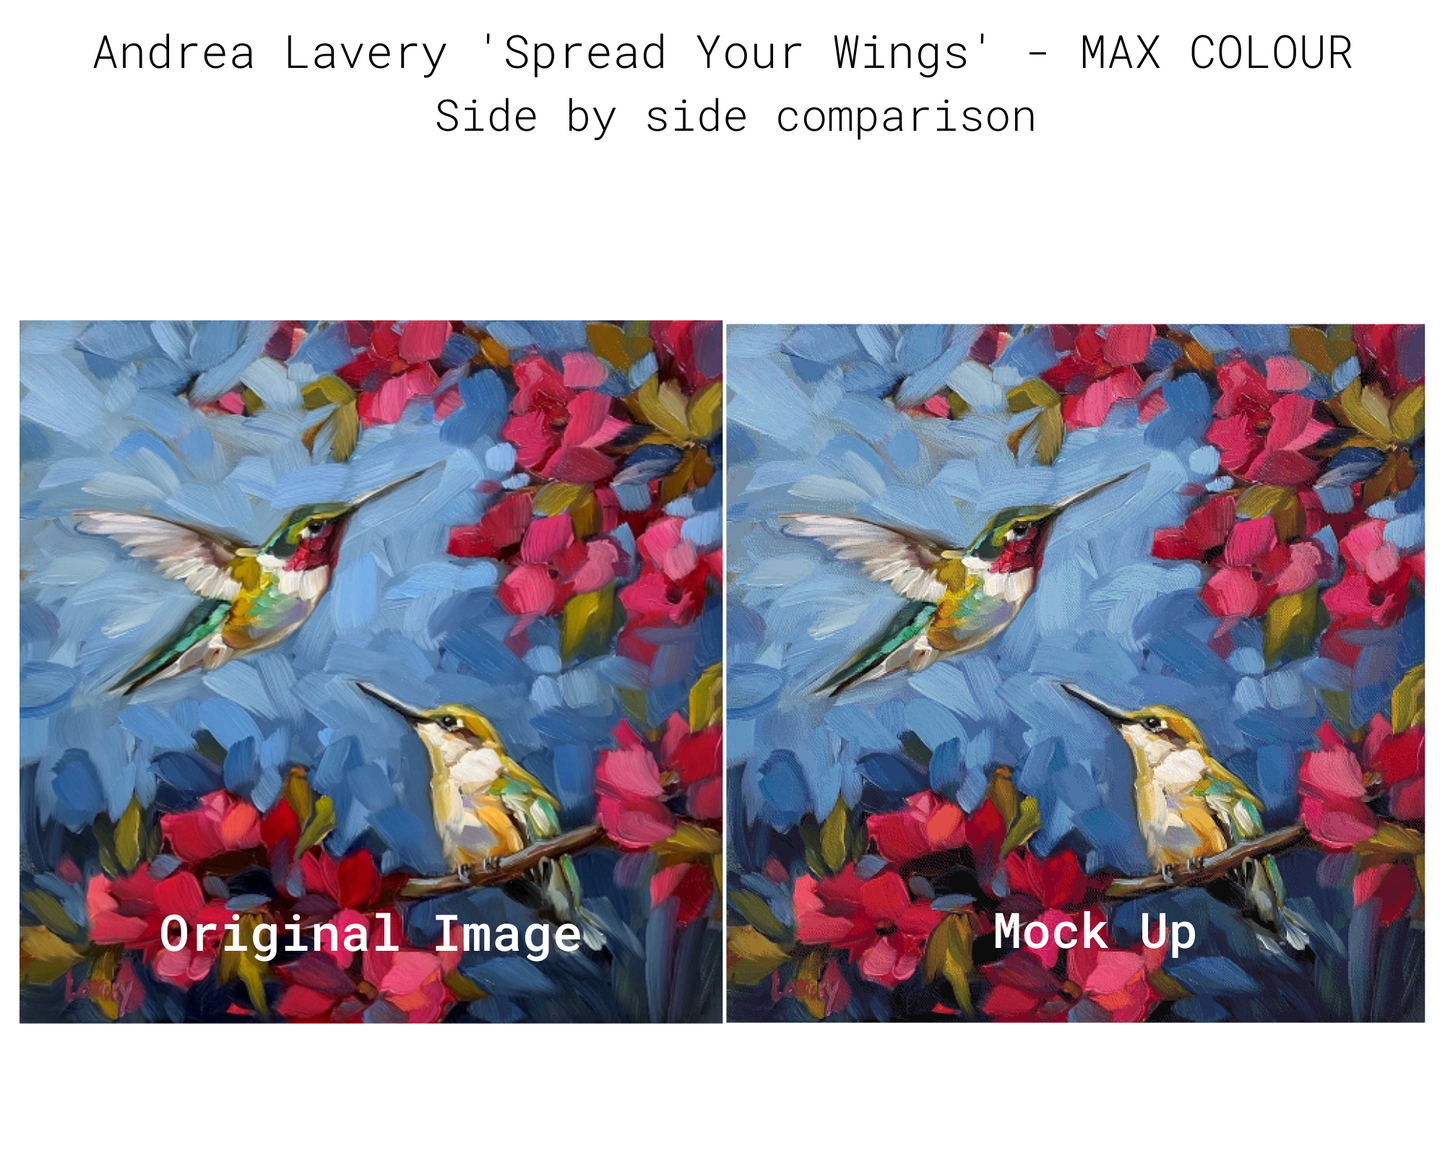 Spread Your Wings - MAX COLOUR